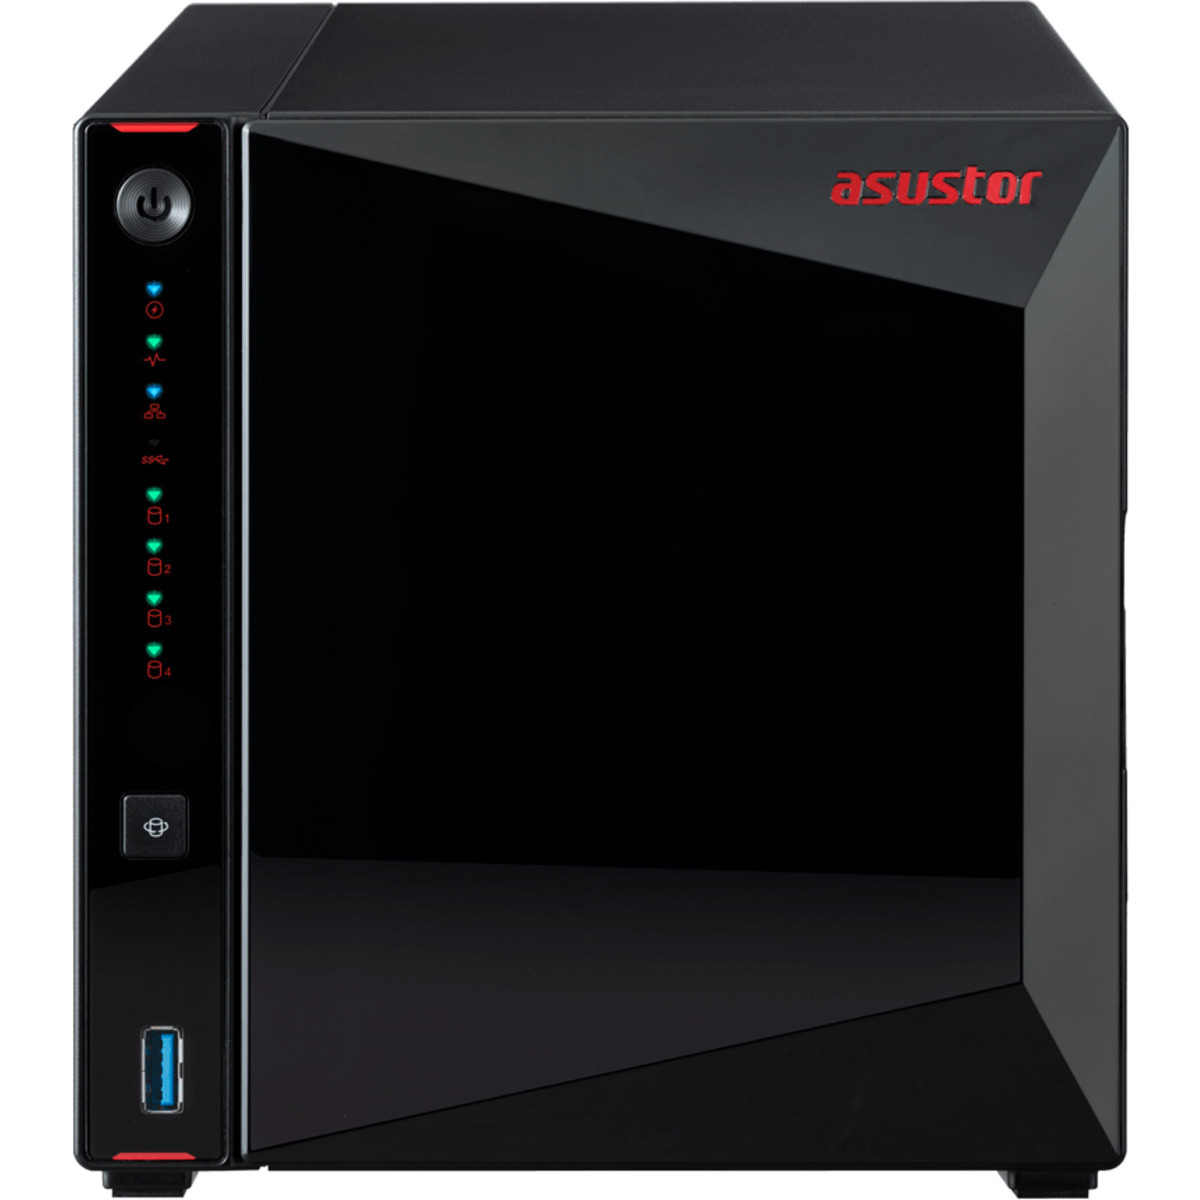 ASUSTOR AS5304T Nimbustor 24tb 4-Bay Desktop Multimedia / Power User / Business NAS - Network Attached Storage Device 4x6tb Seagate IronWolf ST6000VN006 3.5 5400rpm SATA 6Gb/s HDD NAS Class Drives Installed - Burn-In Tested - FREE RAM UPGRADE AS5304T Nimbustor